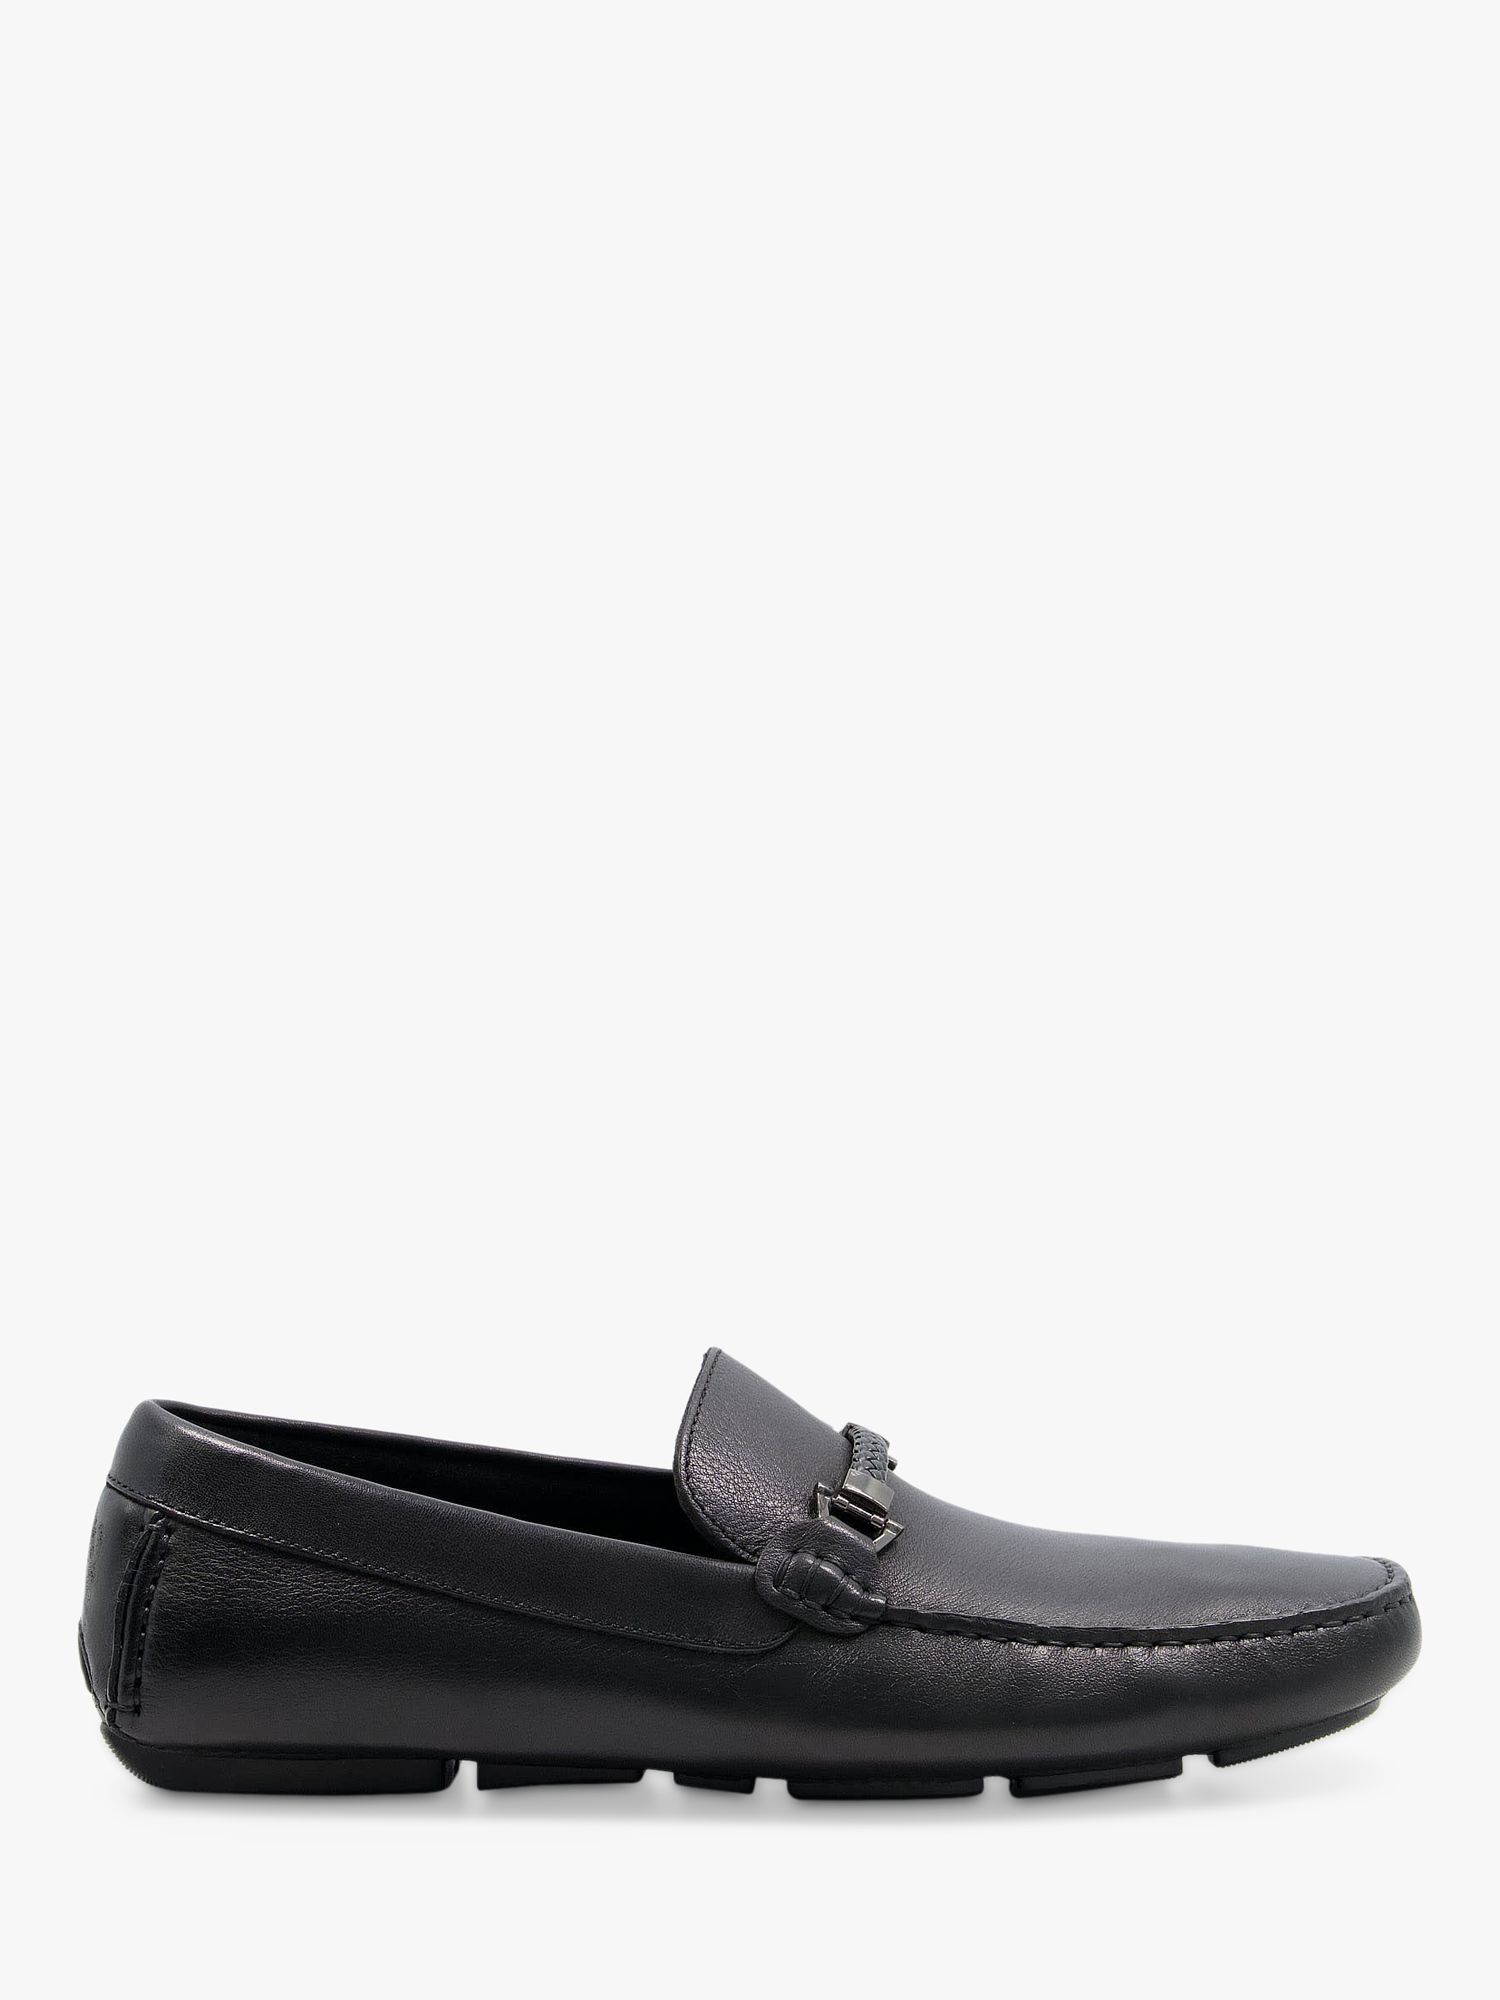 Dune Beacons Leather Loafers, Black at John Lewis & Partners